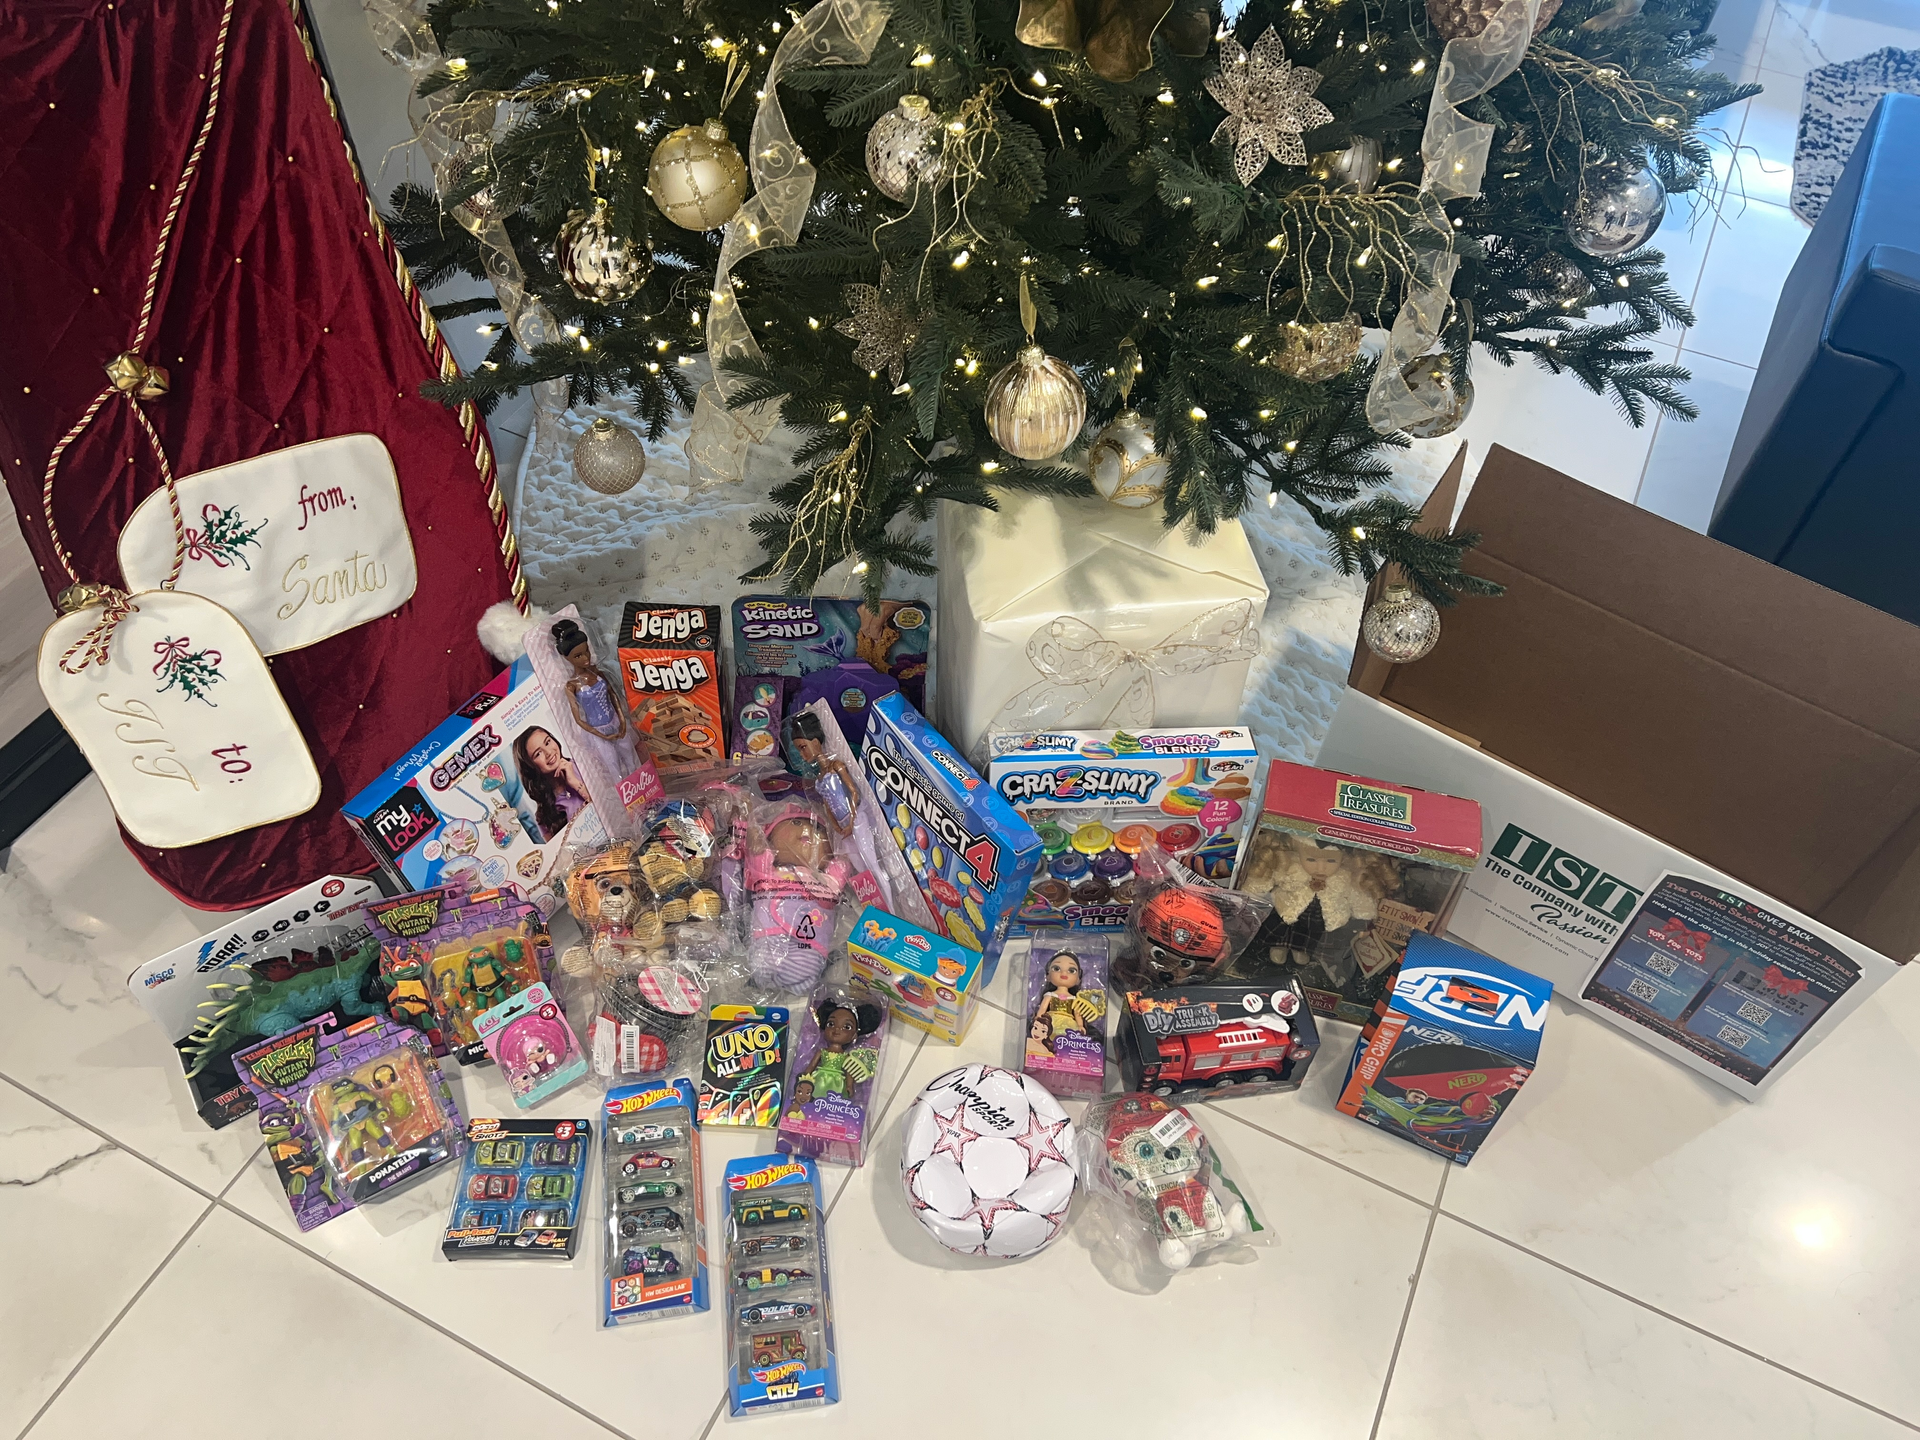 Some of the donations from IST's corporate office for MUST Ministries' Toy Shop